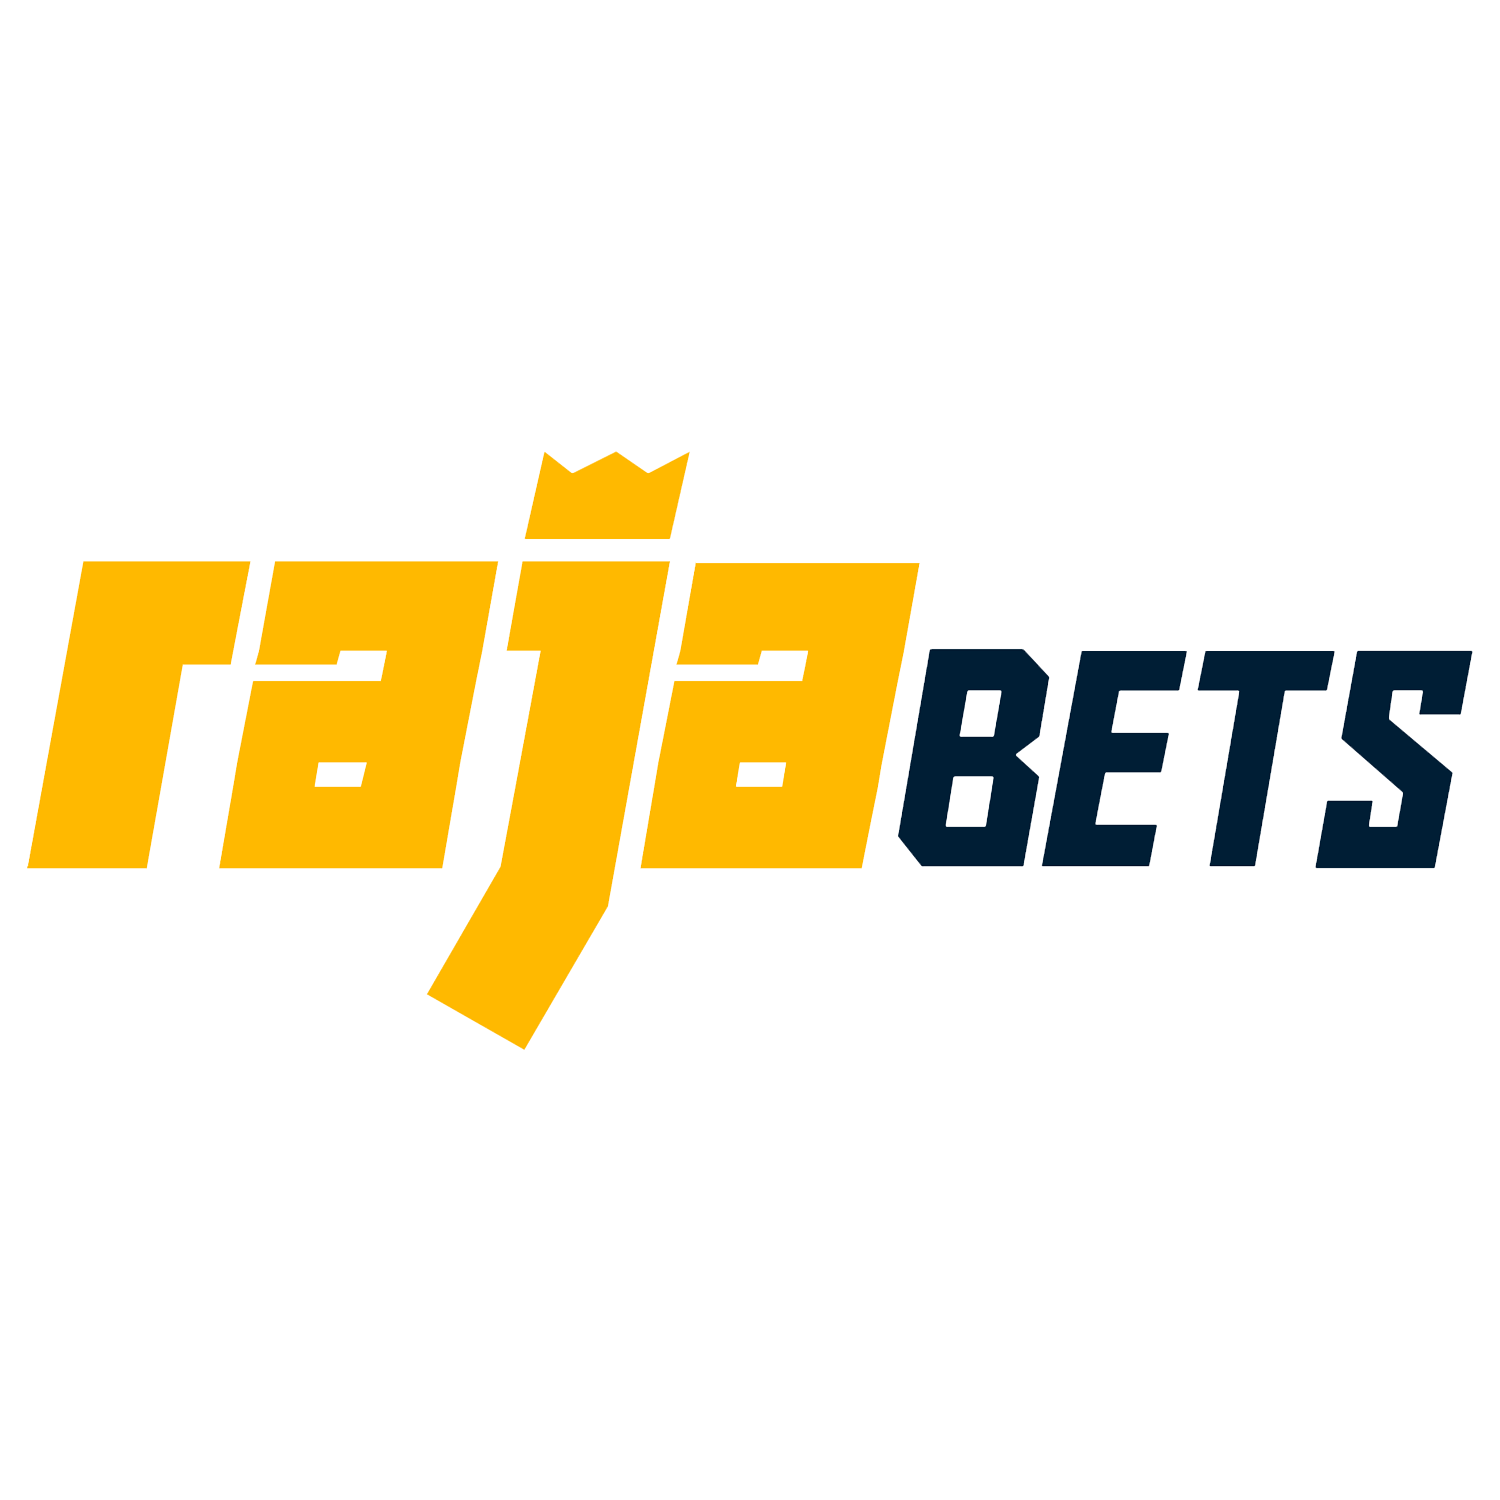 Rajabets focuses on cricket betting for Indian users.